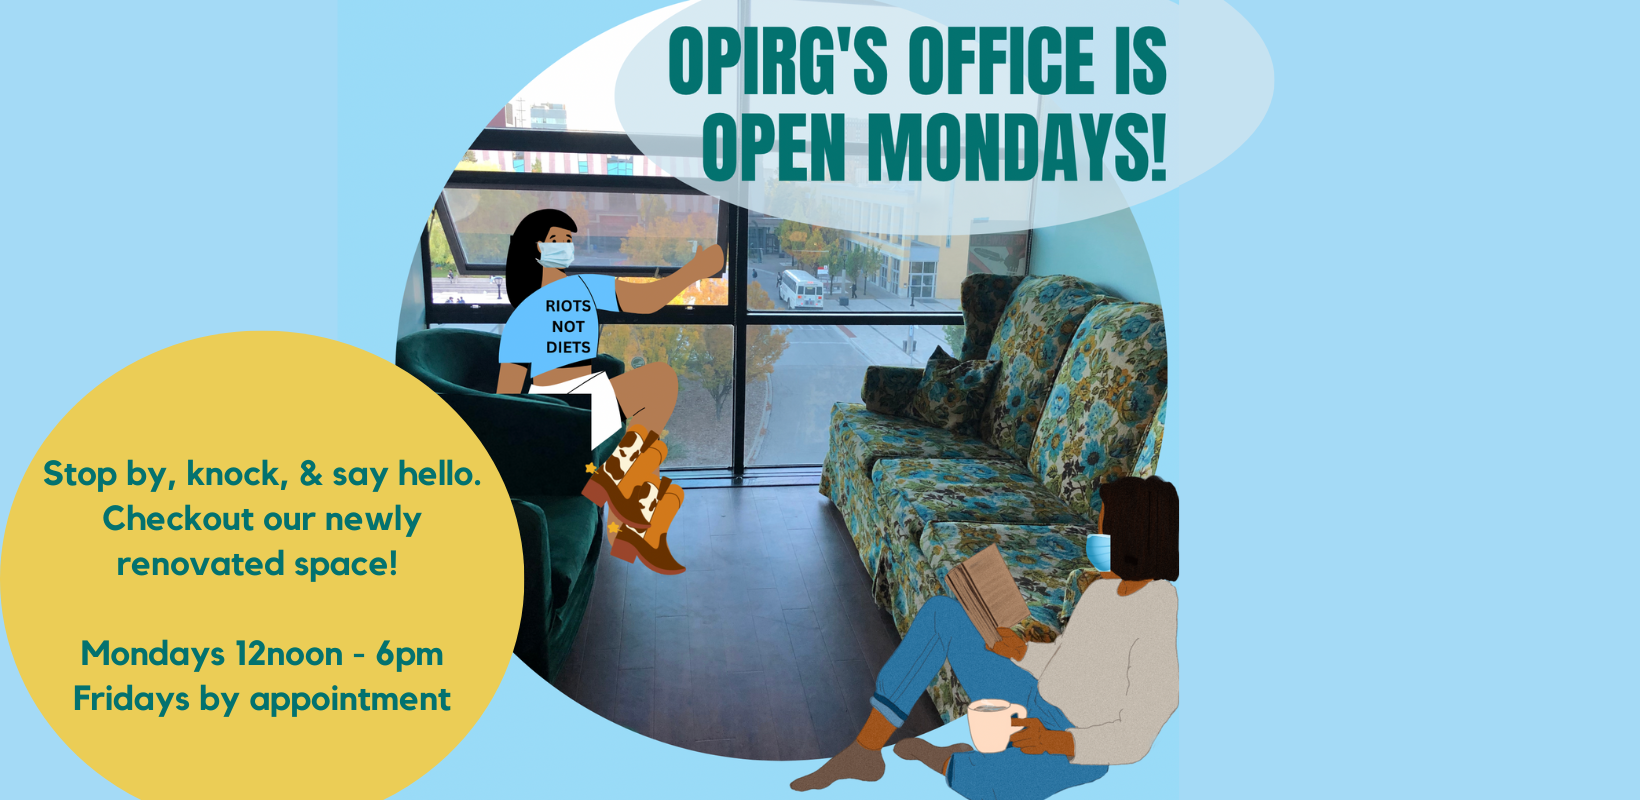 OPIRG'S office is open Mondays!
on a light blue background there is a circular image of the OPIRG York office: a floral couch, and green tub chairs. There are two cartoon people hanging out wearing masks for everyone’s health and safety. One is wearing a “Riots not diets” Tshirt and cowboy boots; the other sits with a book and a coffee. To the left is the on a mustard yellow background with green text it reads: Stop by, knock, & say hello. Checkout our newly renovated space! / Mondays 12noon - 6pm/ Fridays by appointment